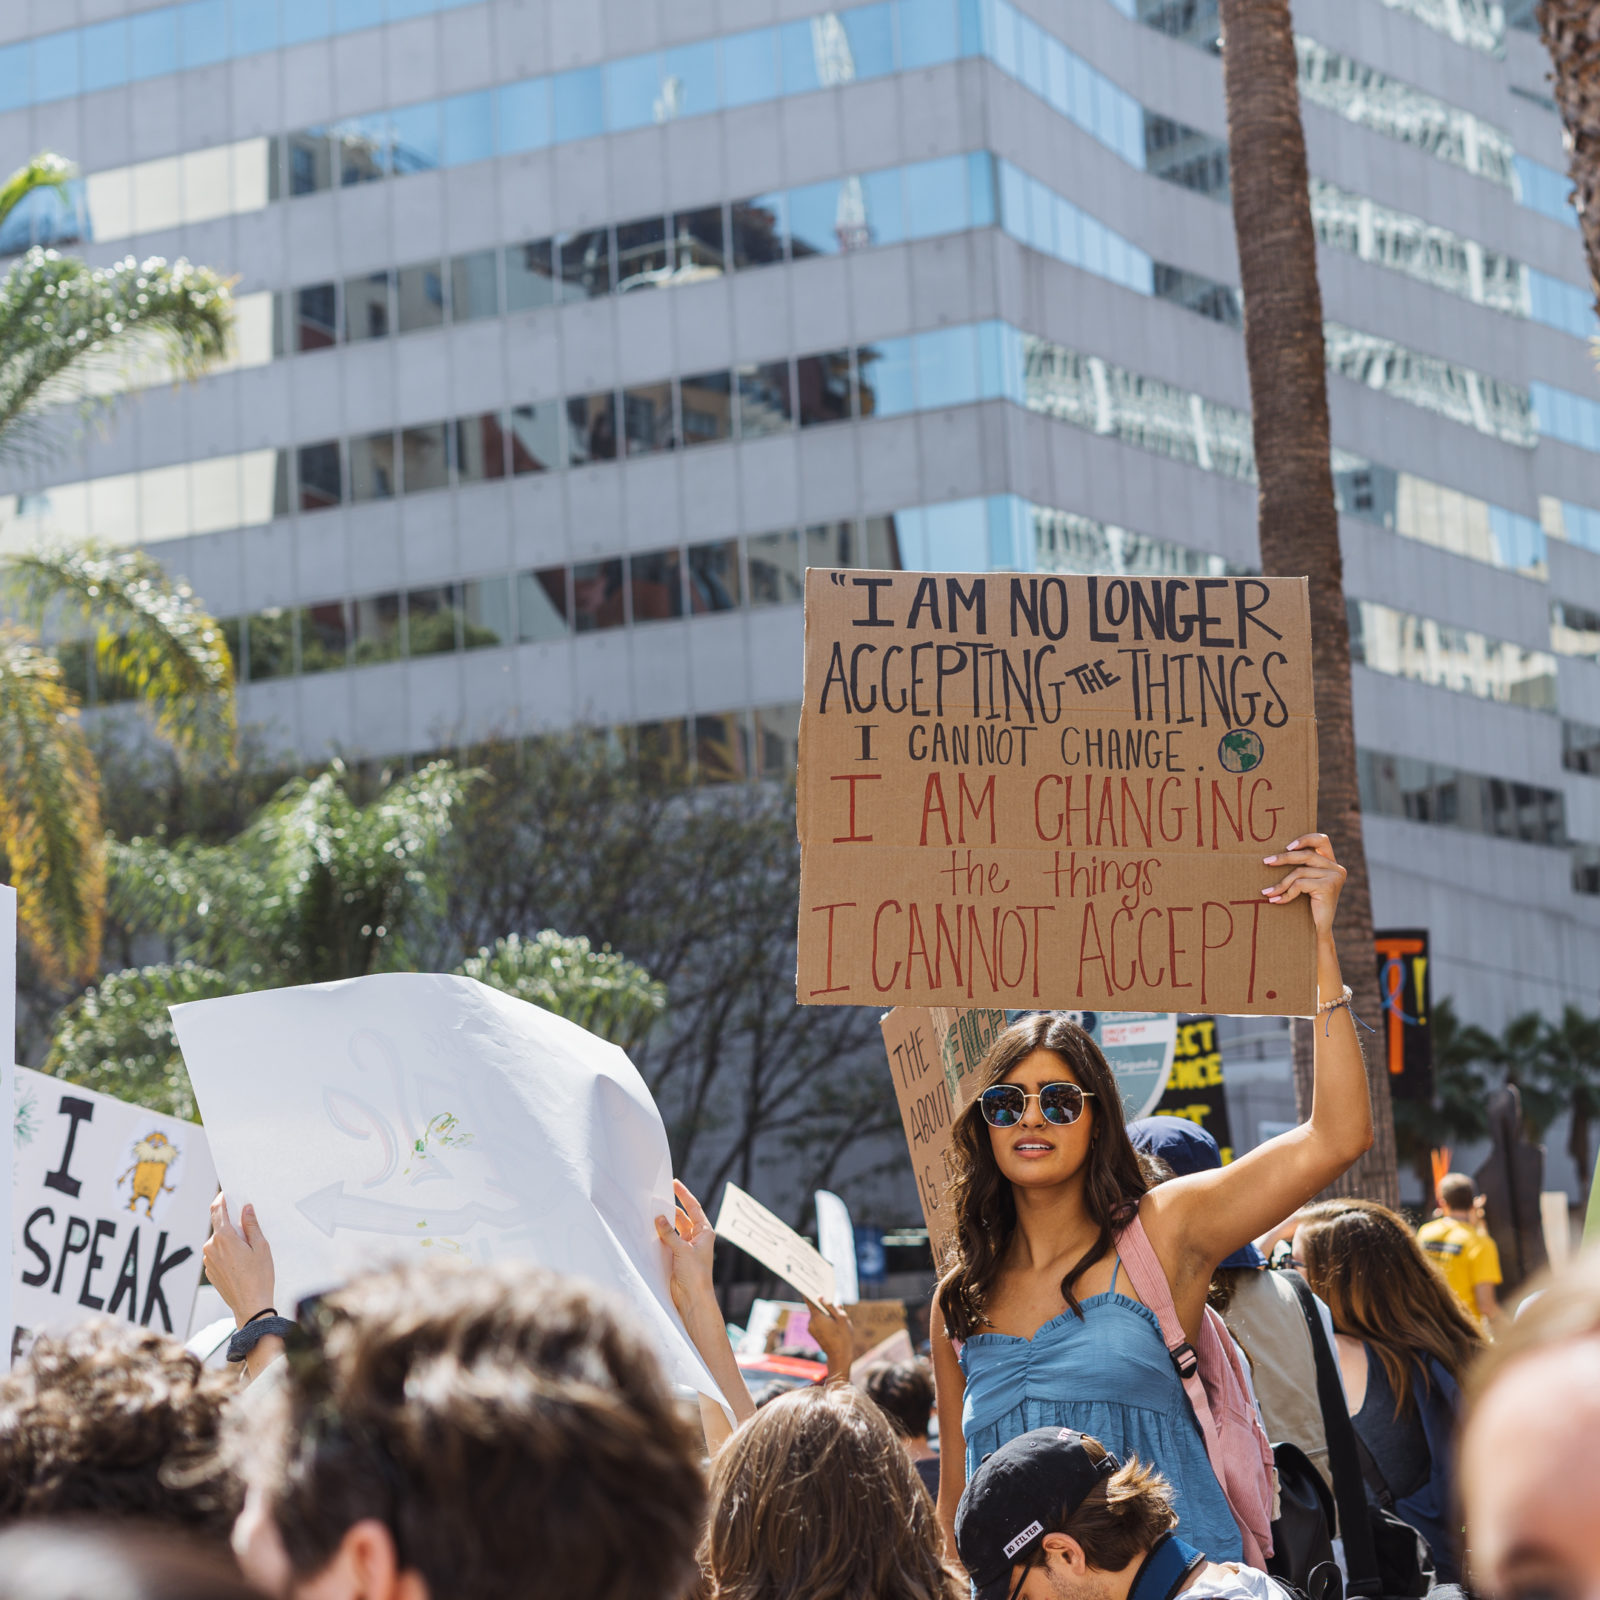 An activist holds a sign saying "I am no longer accepting the things I cannot change. I am changing the things I no longer accept" during the September 2019 Climate Strike.